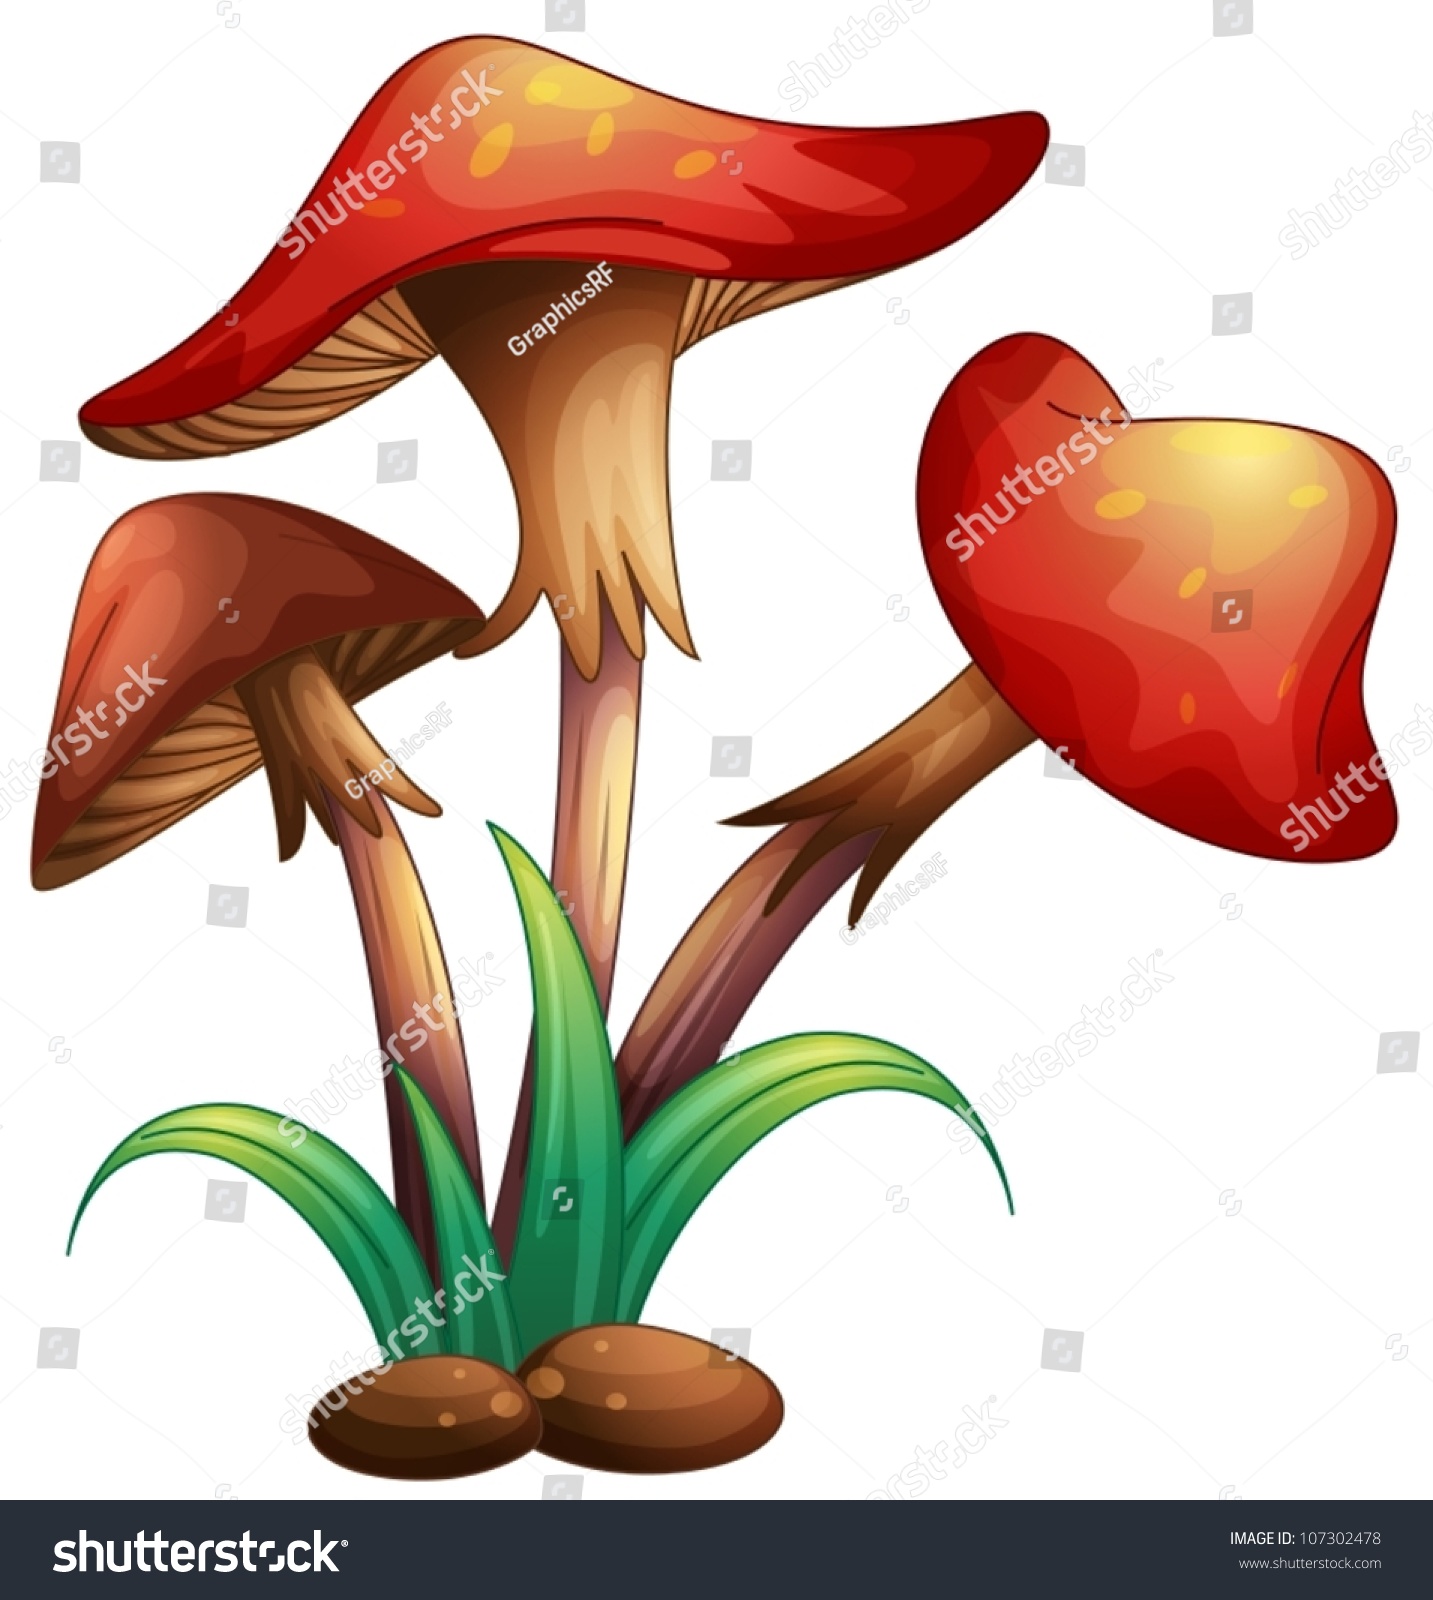 Illustration Of Red Mushrooms On A White Background 107302478